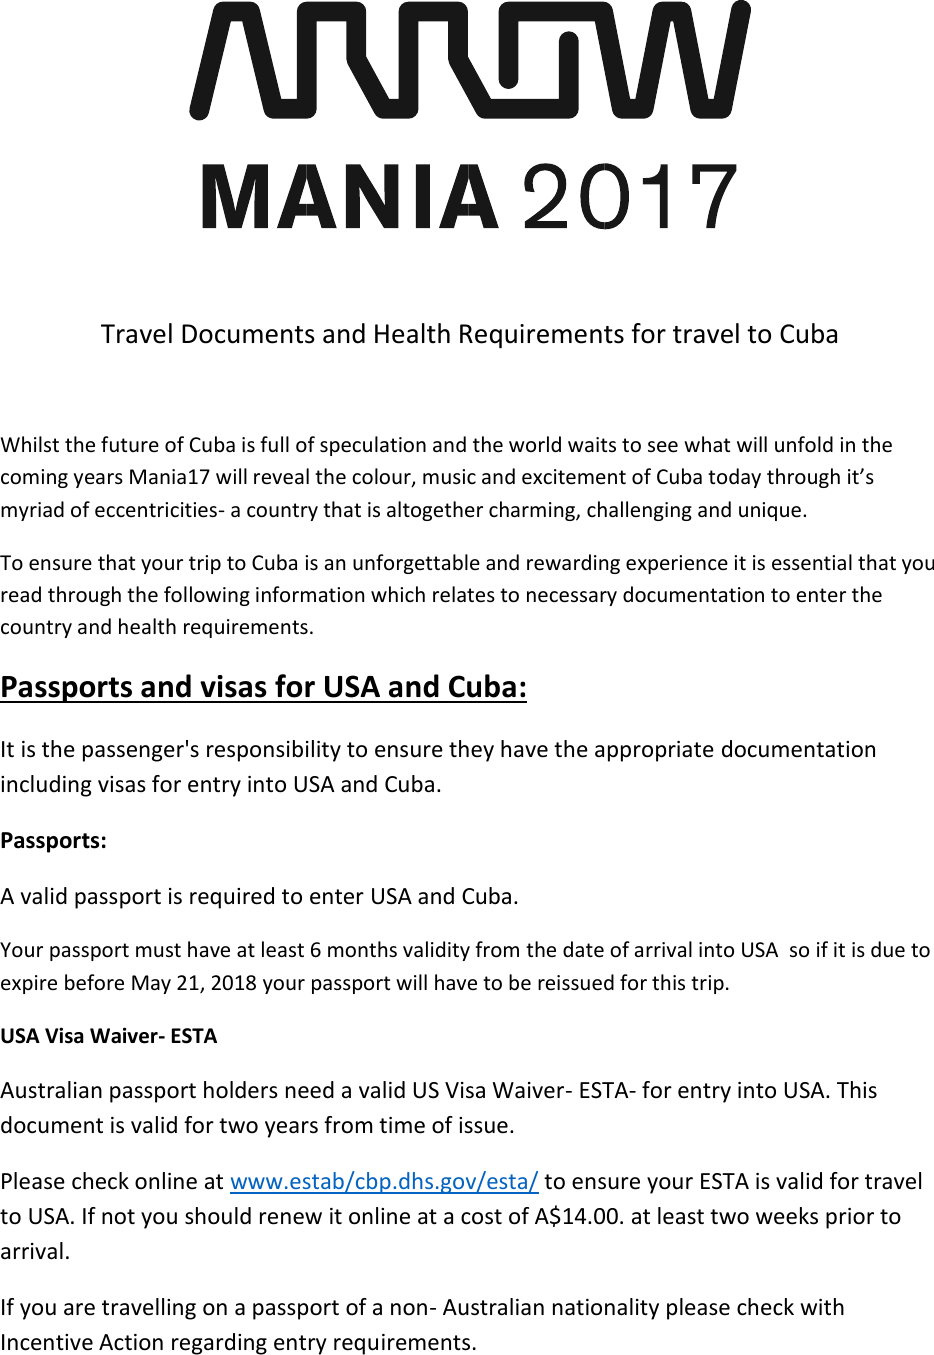 Page 1 of 3 - Travel-s-and-Health-Requirements-for-travel-to-Cuba